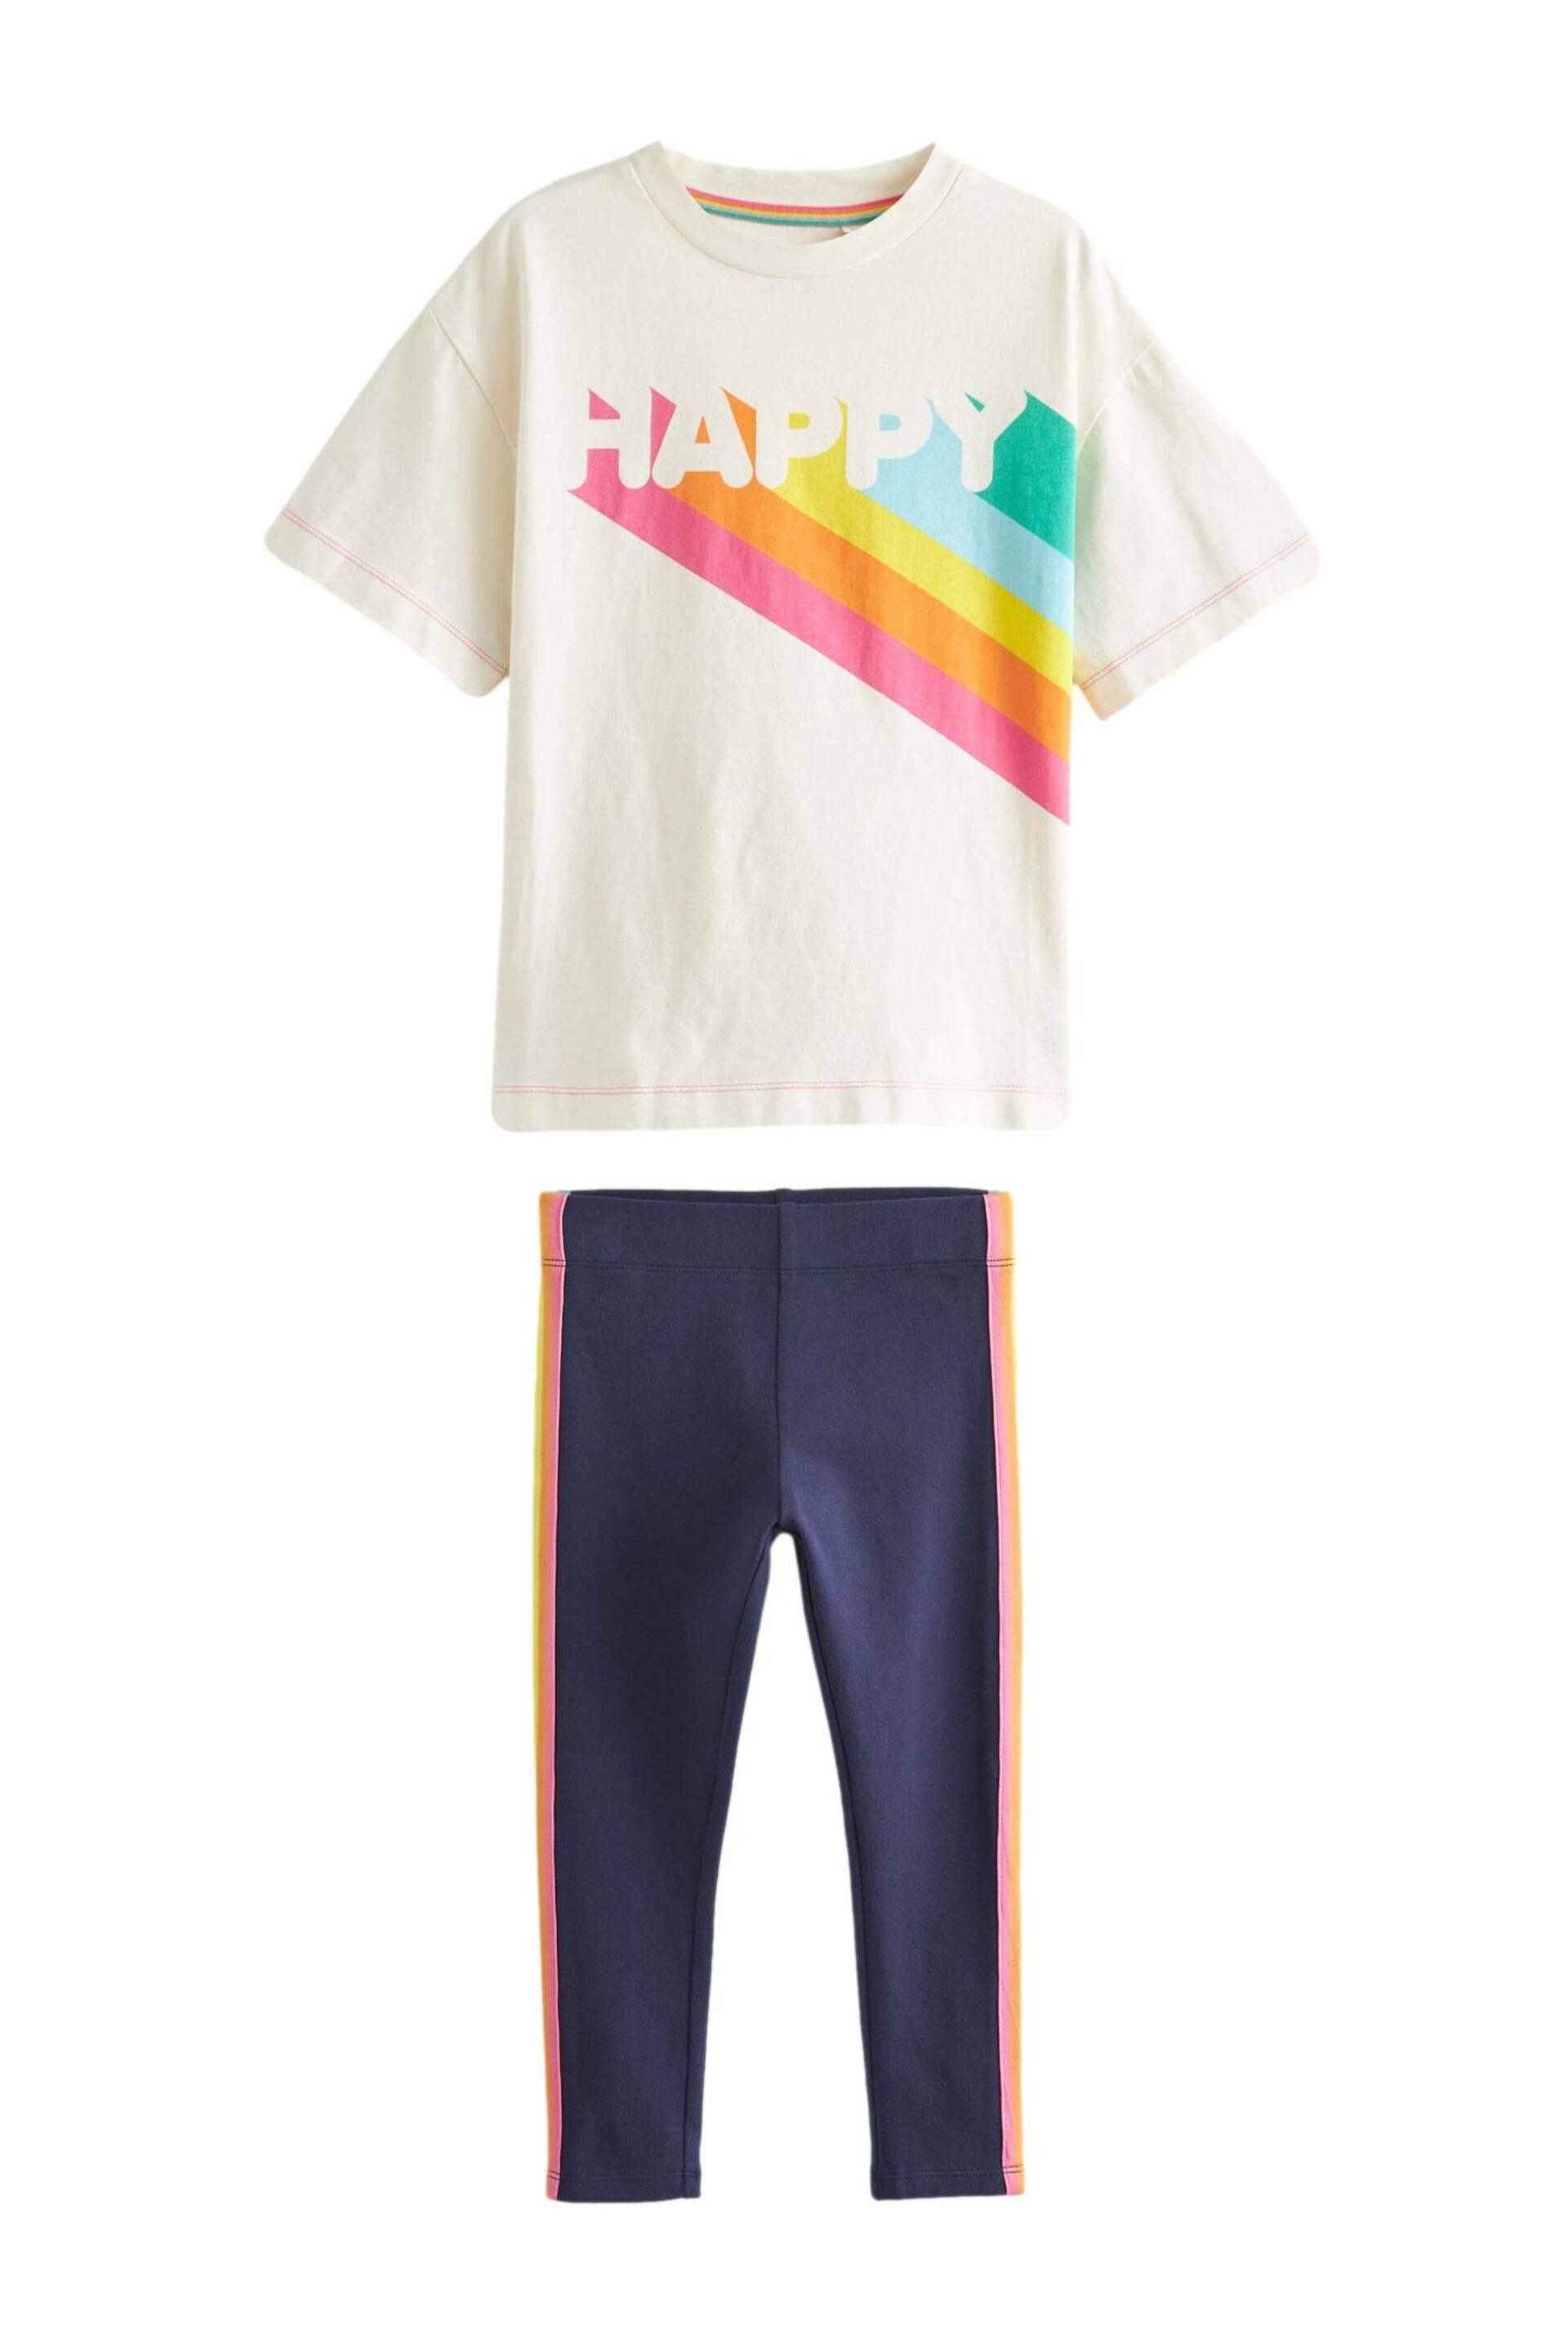 Little Bird by Jools Oliver Ecru/Navy Happy T-Shirt and Legging Set - Image 7 of 7